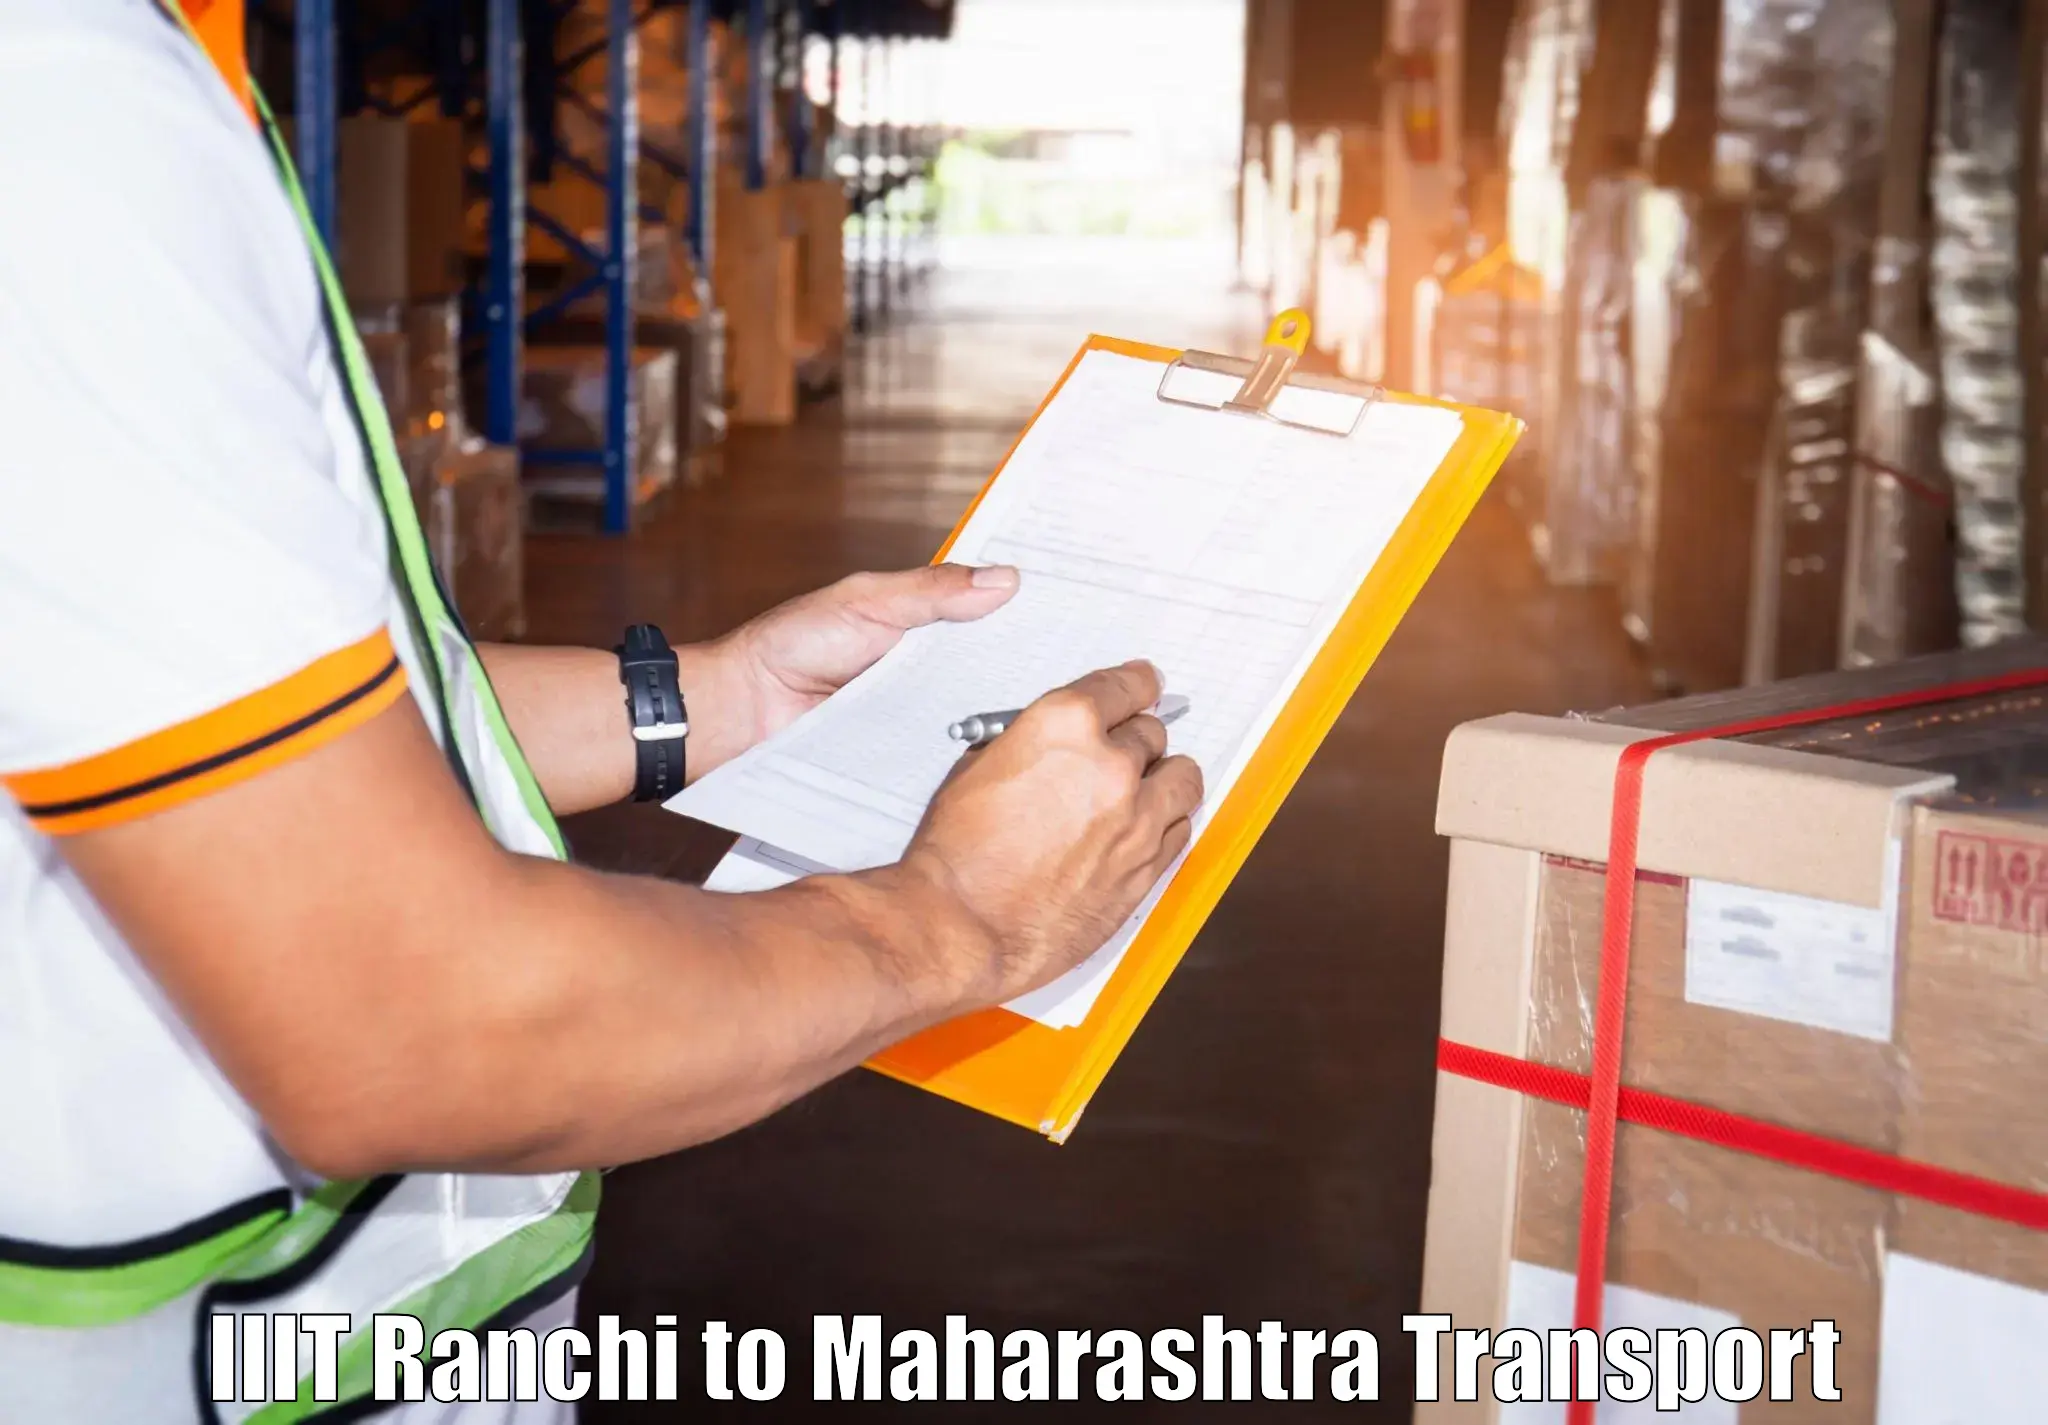 Container transport service IIIT Ranchi to Mul